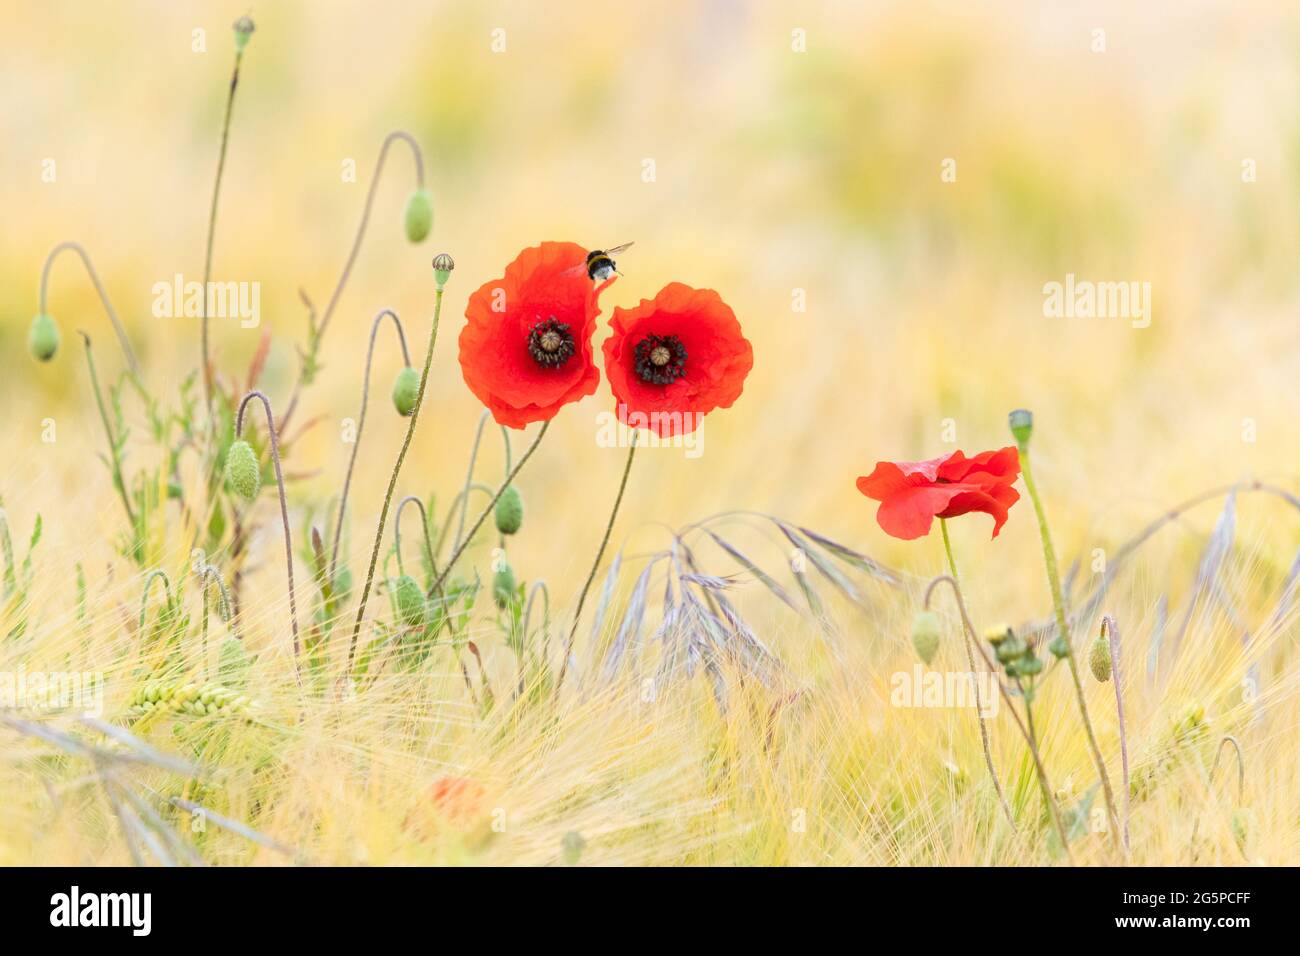 Bumblebee visiting red poppies in barley and oats field planted to benefit wildlife - Scotland, UK Stock Photo